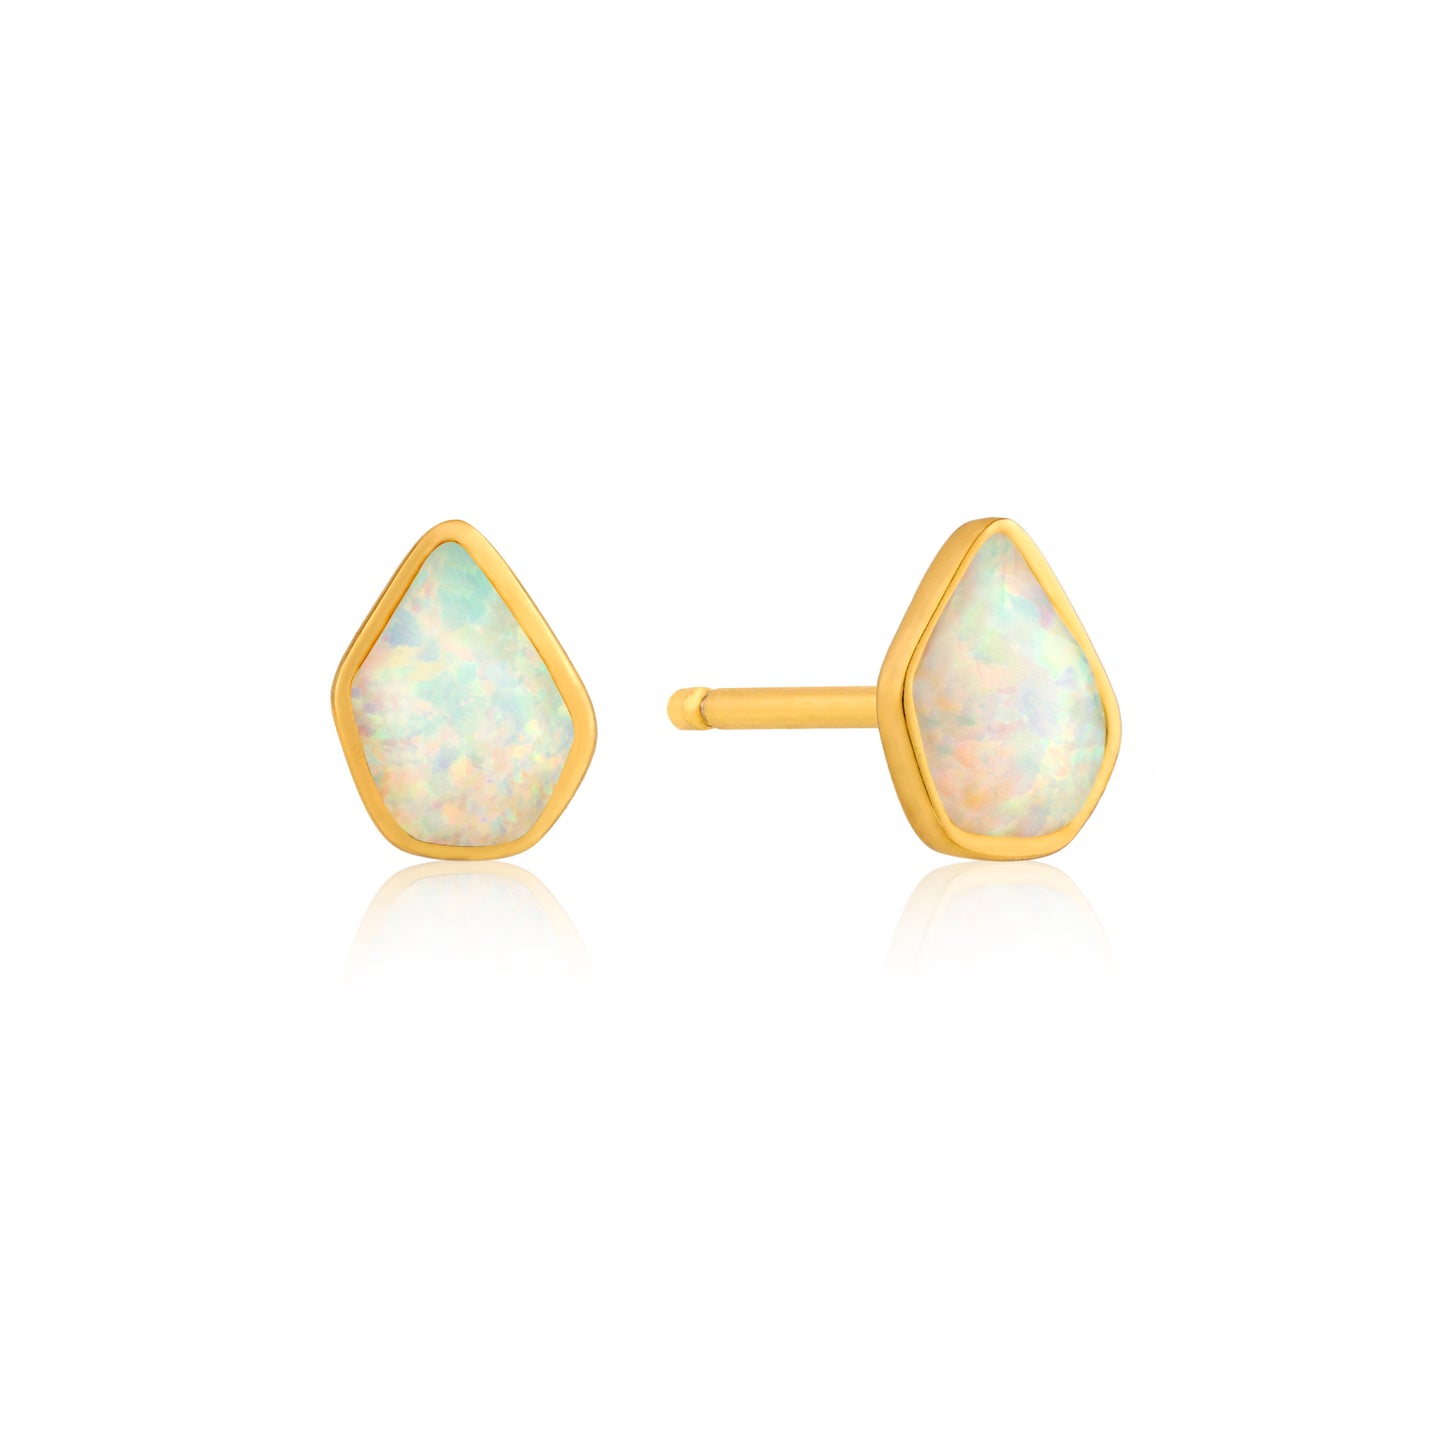 ANIA HAIE ANIA HAIE - Opal Color Gold Stud Earrings available at The Good Life Boutique